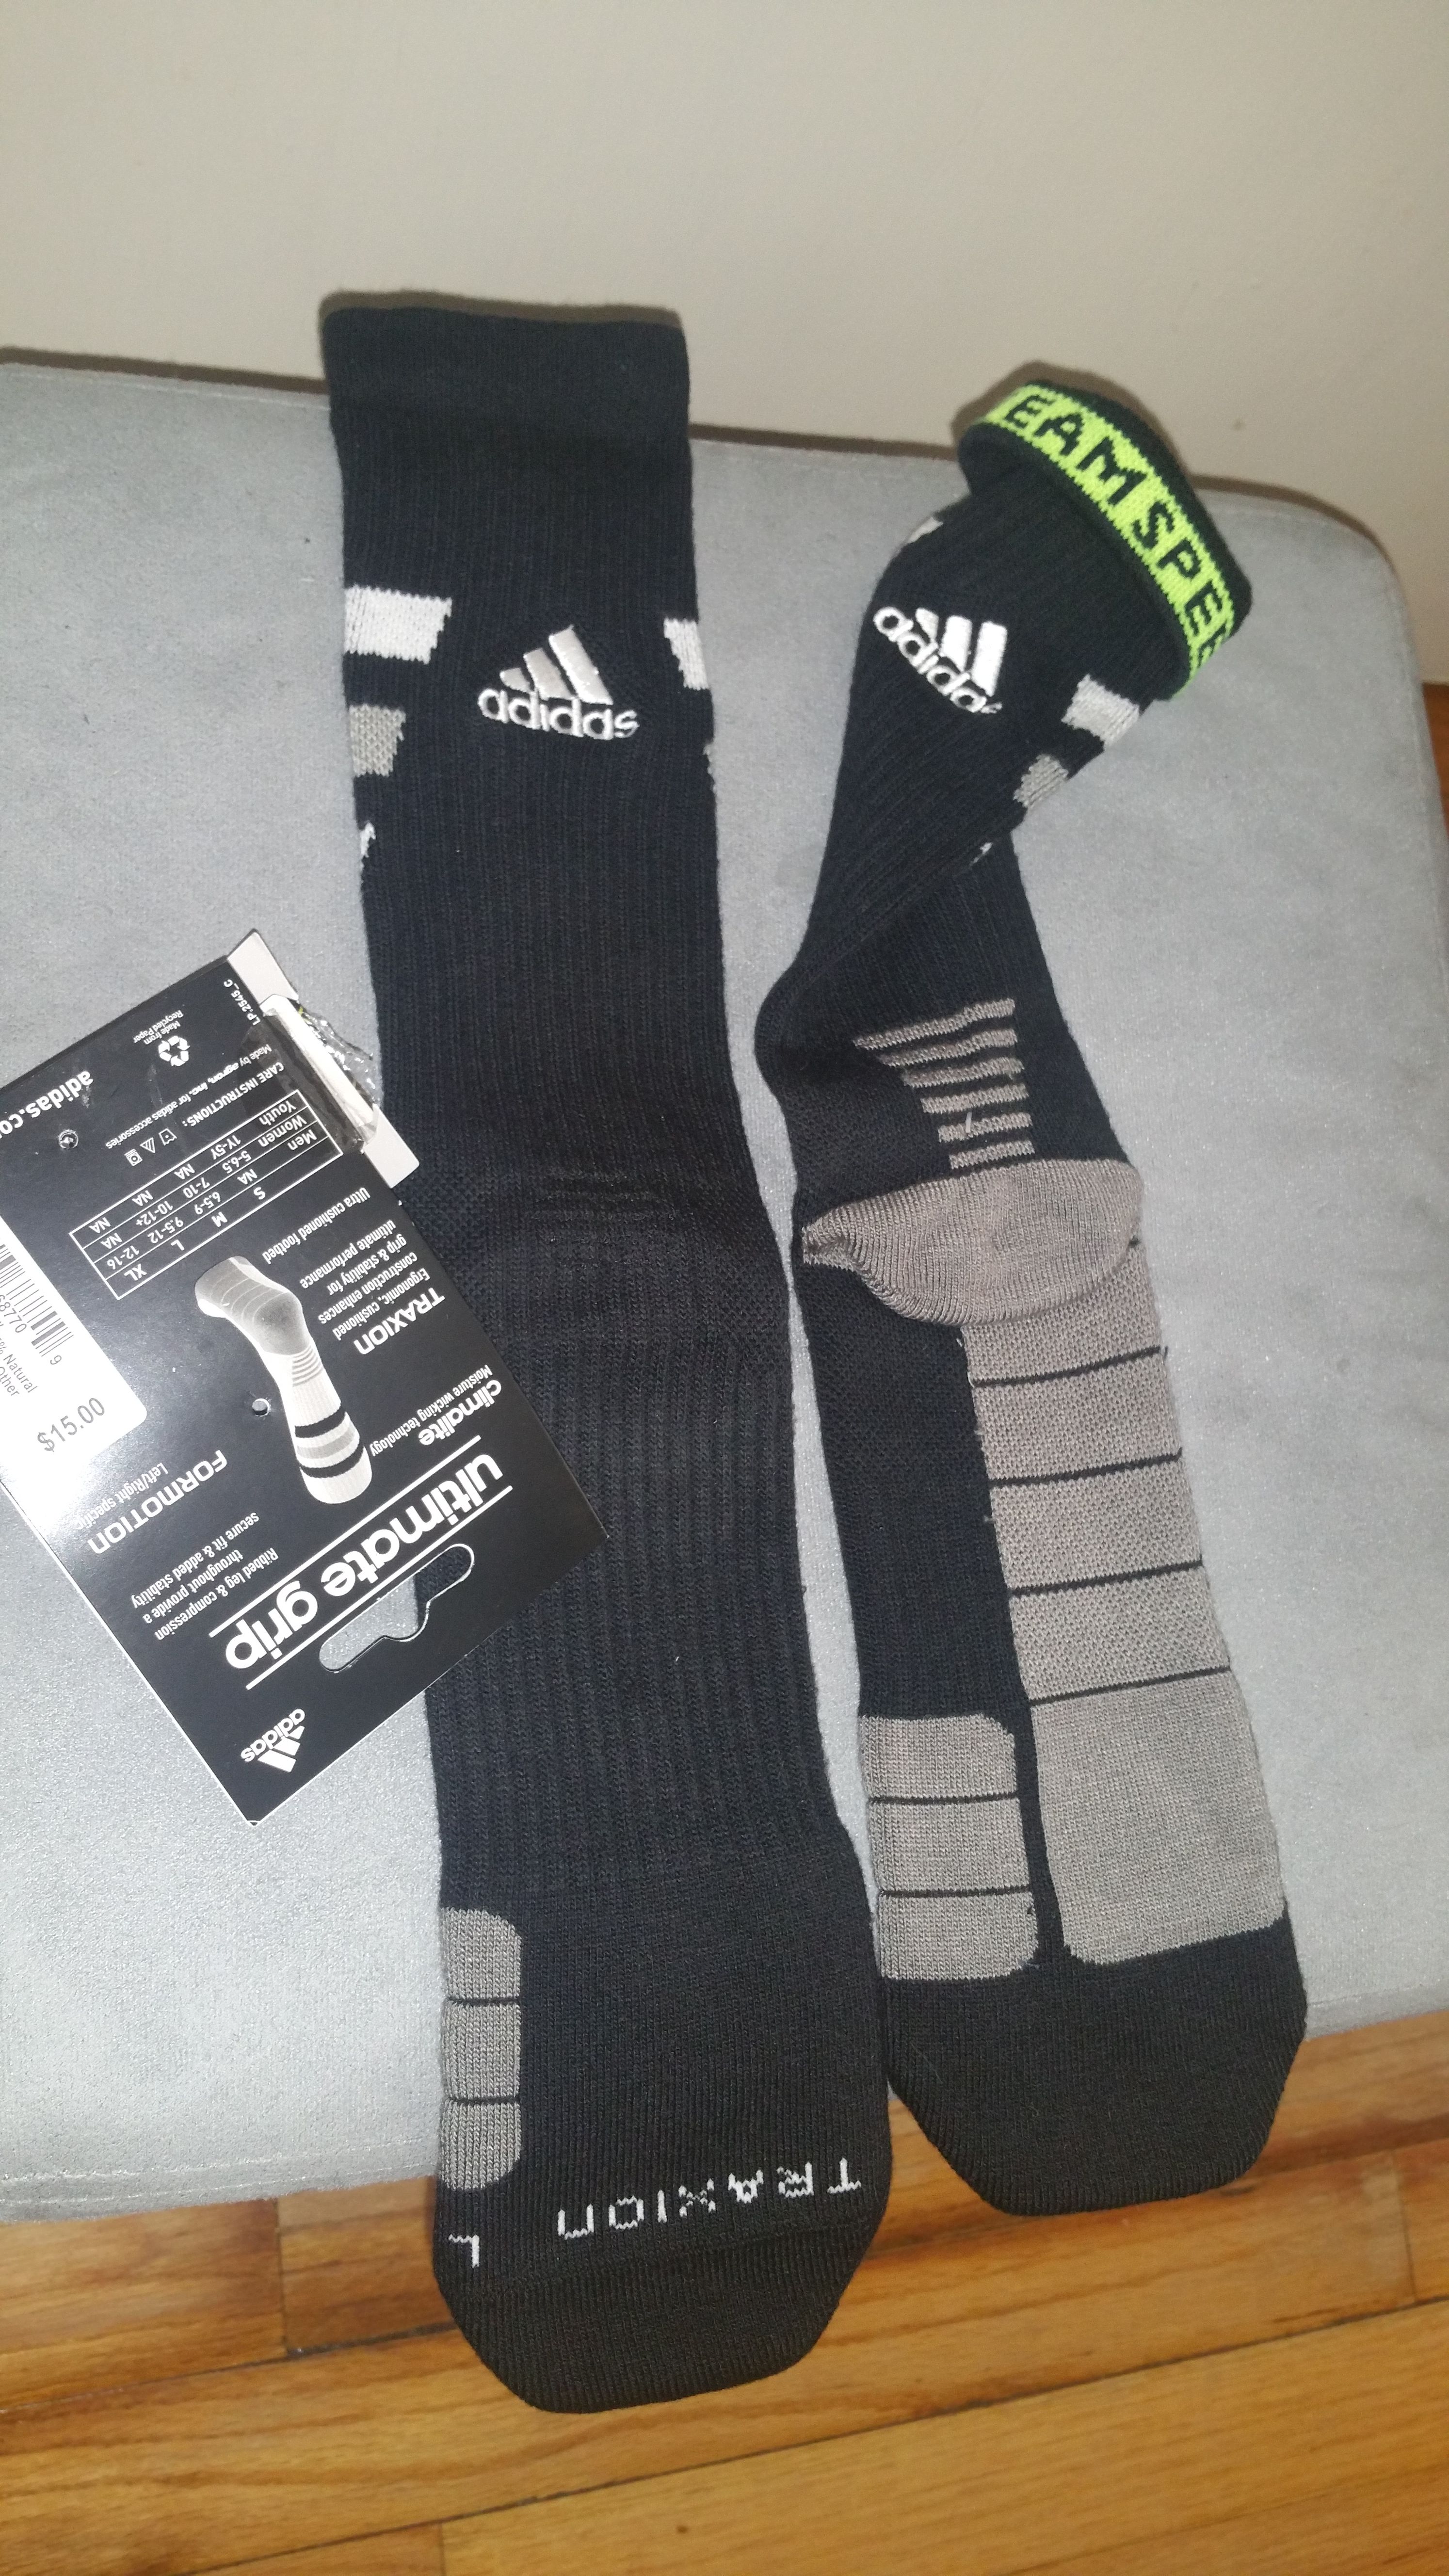 Adidas socks Large new with tag